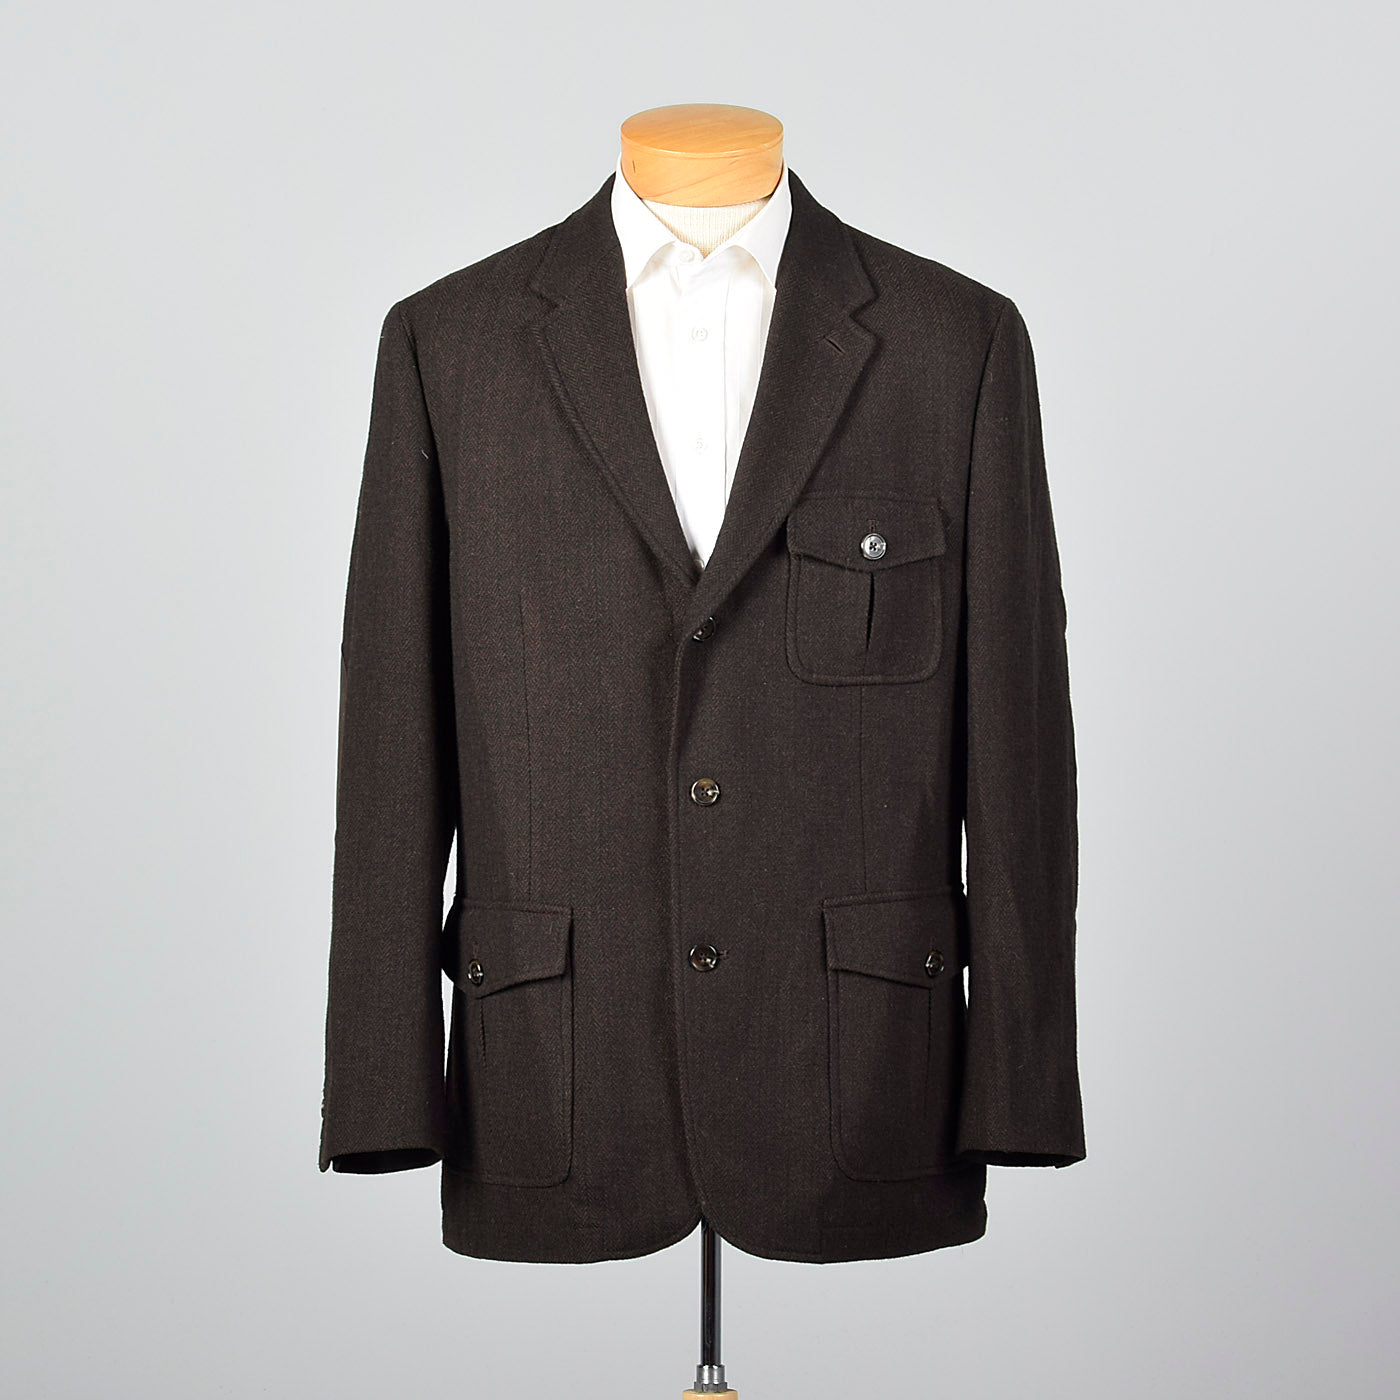 2000 Mens Tweed Jacket with Elbow Patches and Vented Back